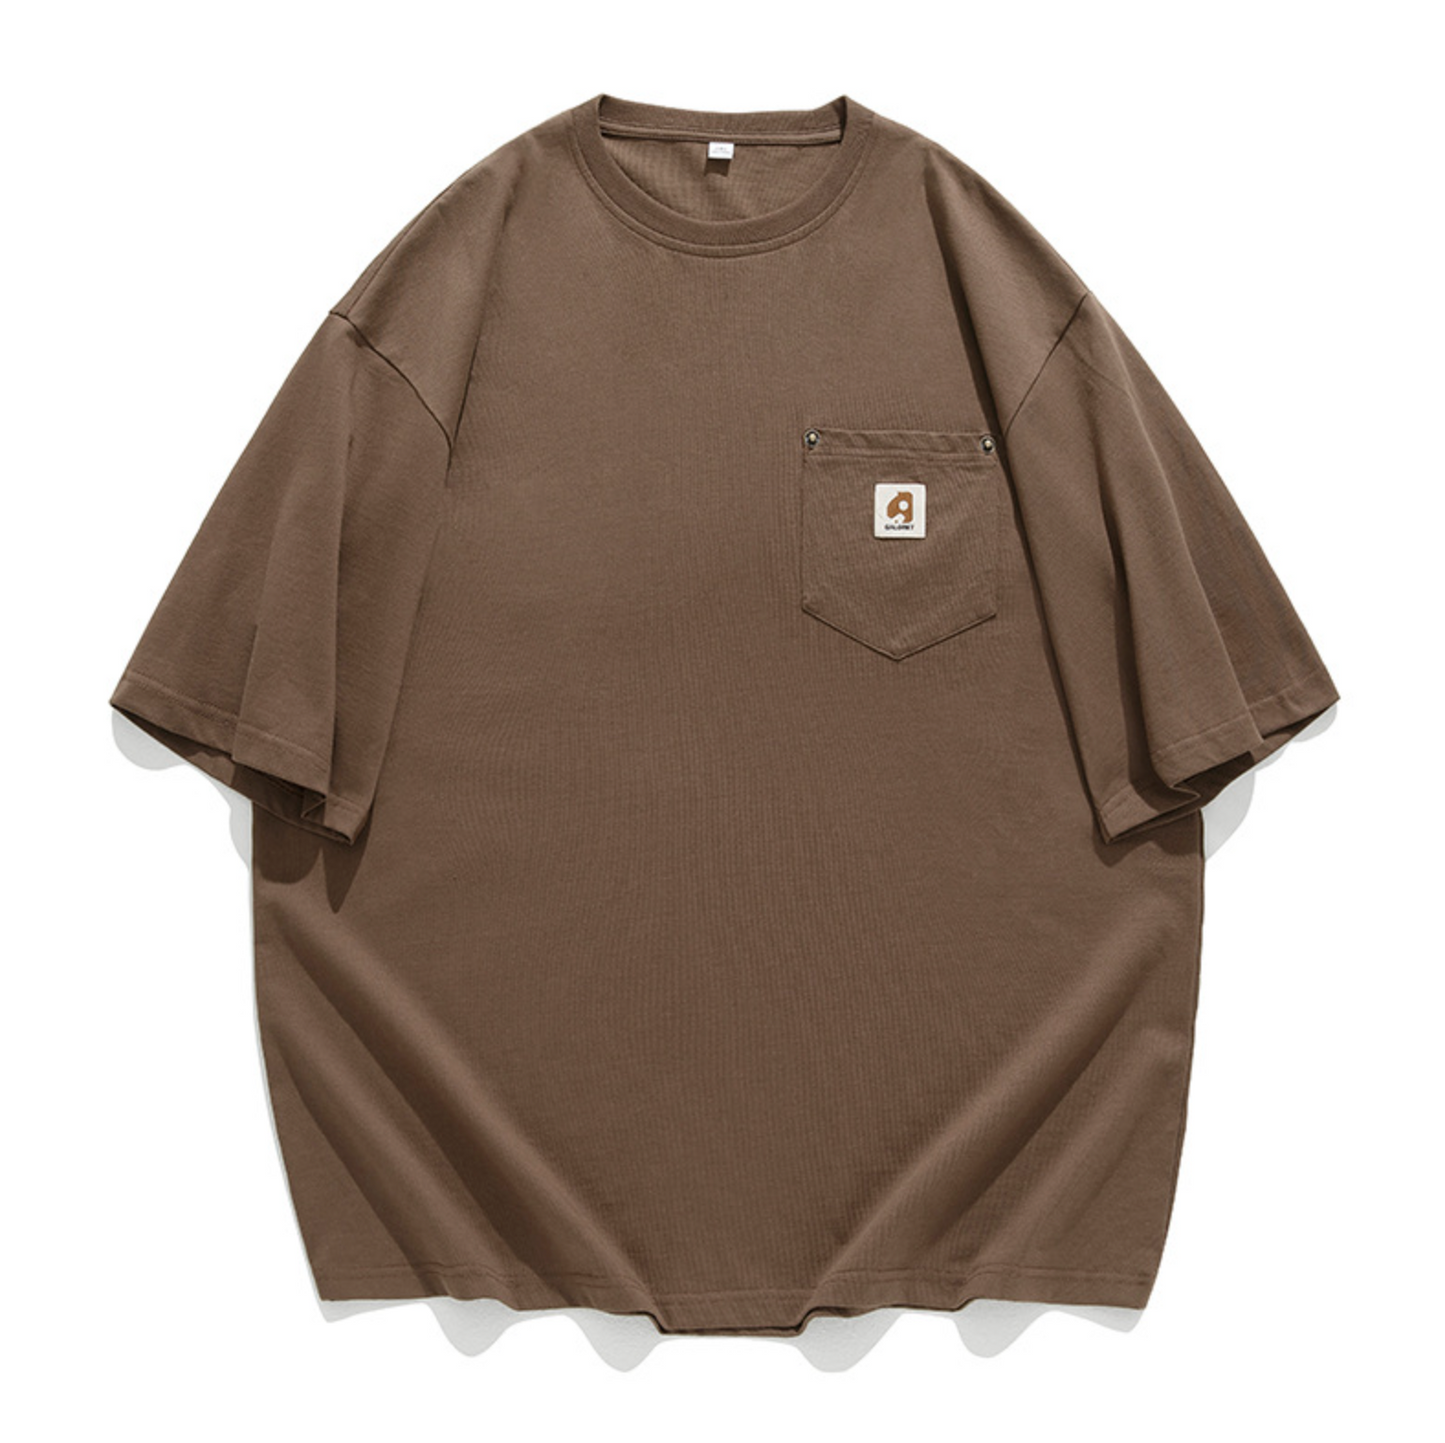 Pocketed Oversized Vintage Tee in Brown (Size L)